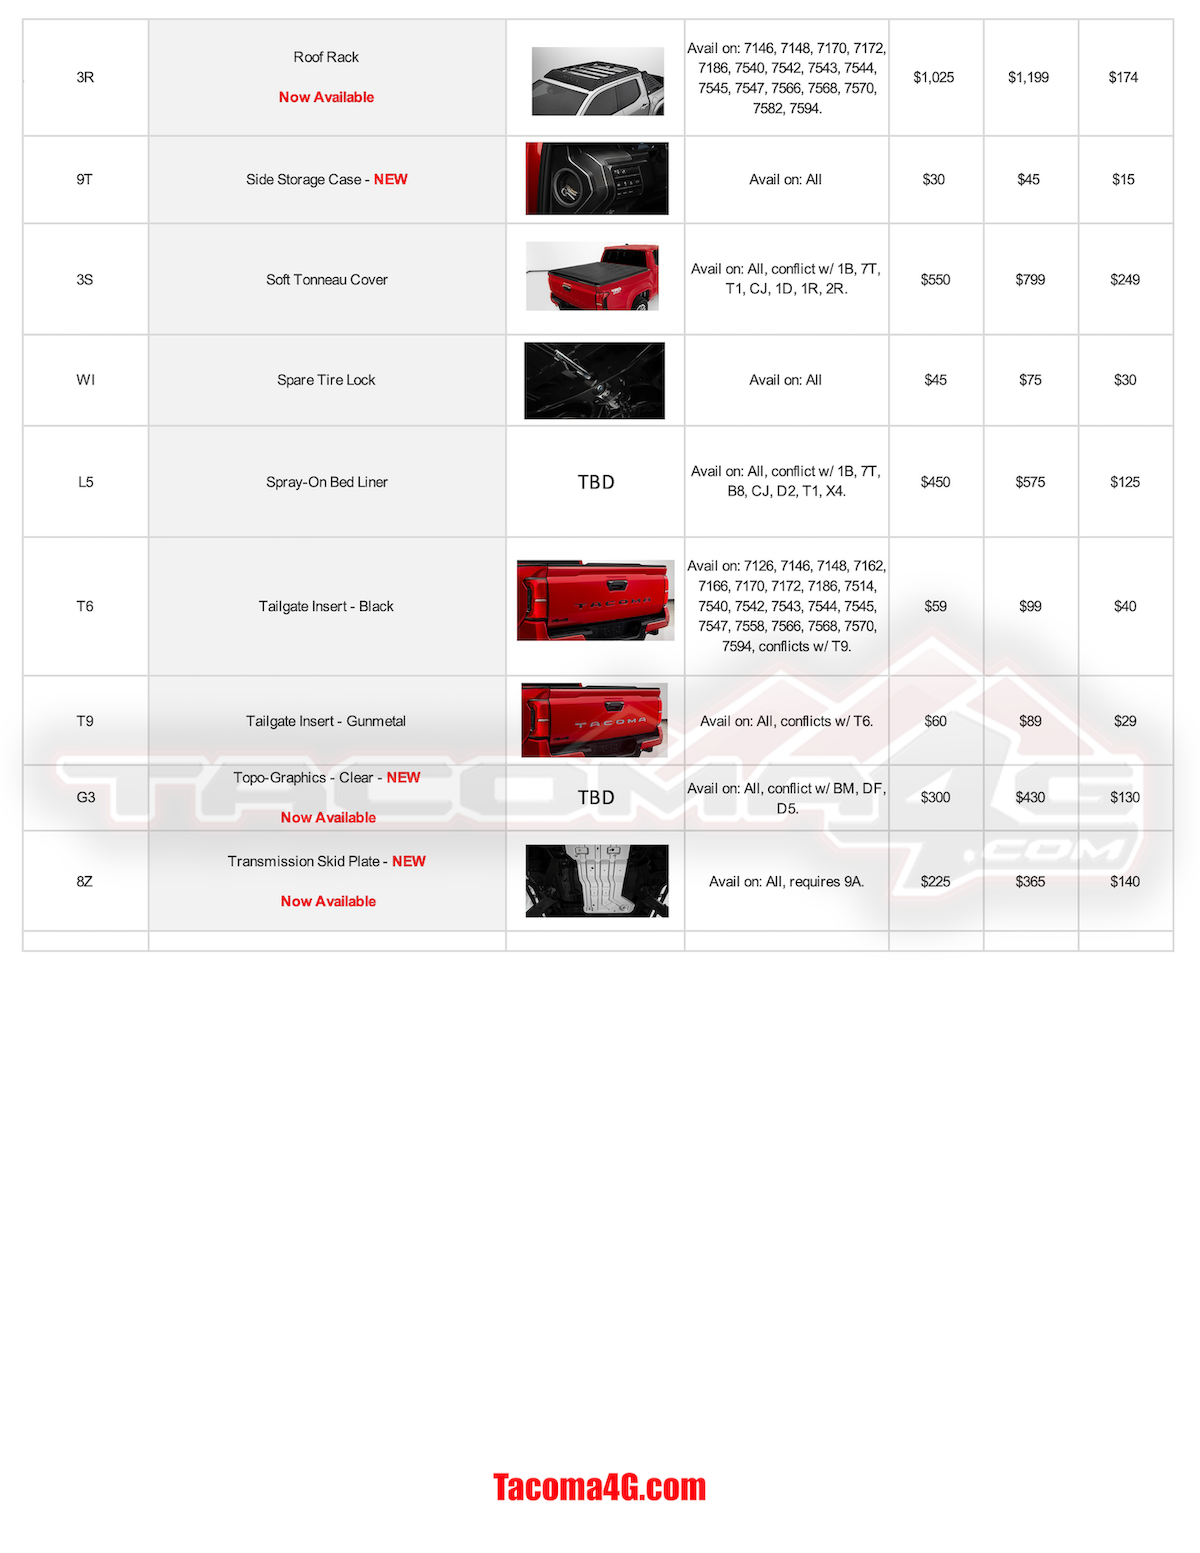 2024 Tacoma 2024 Tacoma Post-Production Options (PPO) Guide - OEM / TRD Accessories Parts + Pricing!  [UPDATED 5-7-24] MY24 Tacoma PPO Guide_04_24_24--6